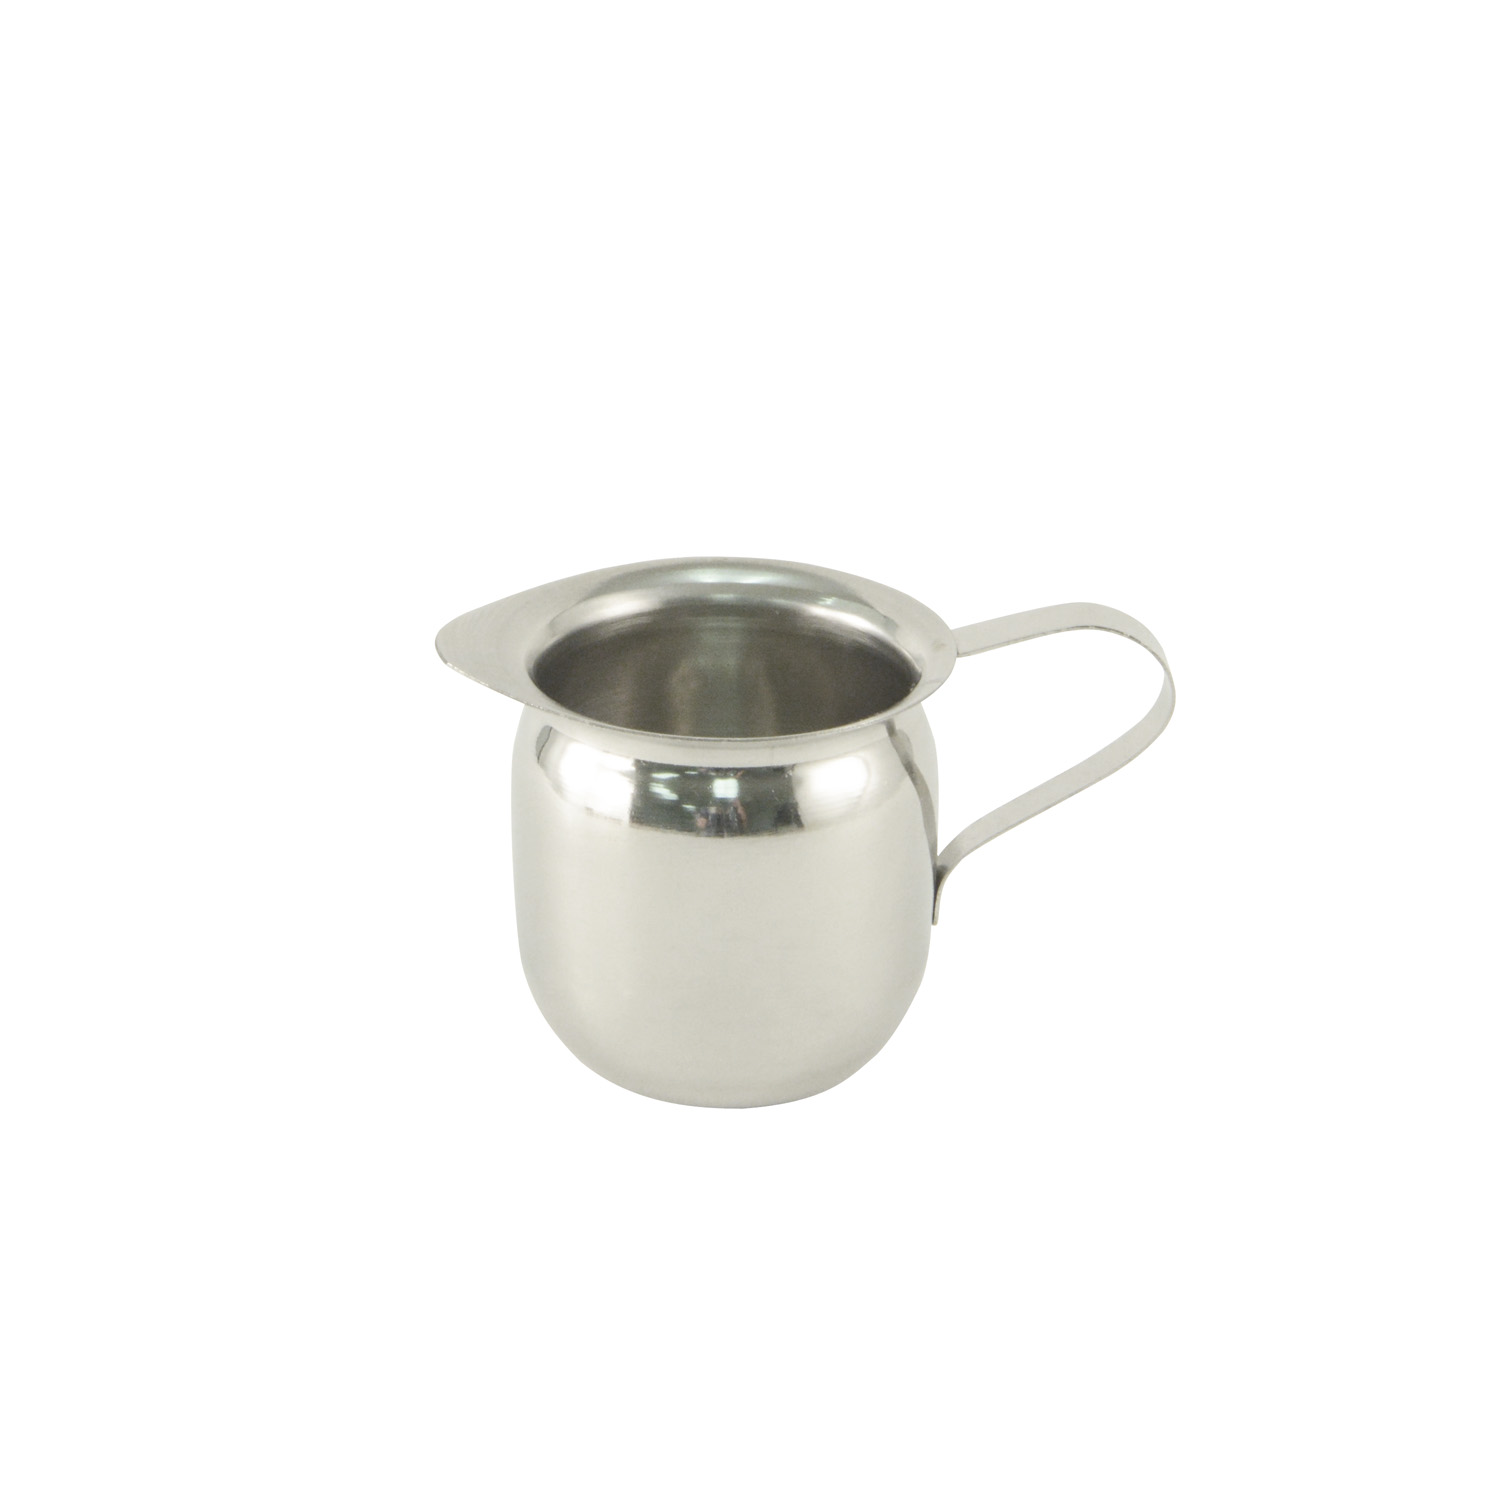 CAC China SSBC-8 Stainless Steel Bell Shape Creamer 8 oz.